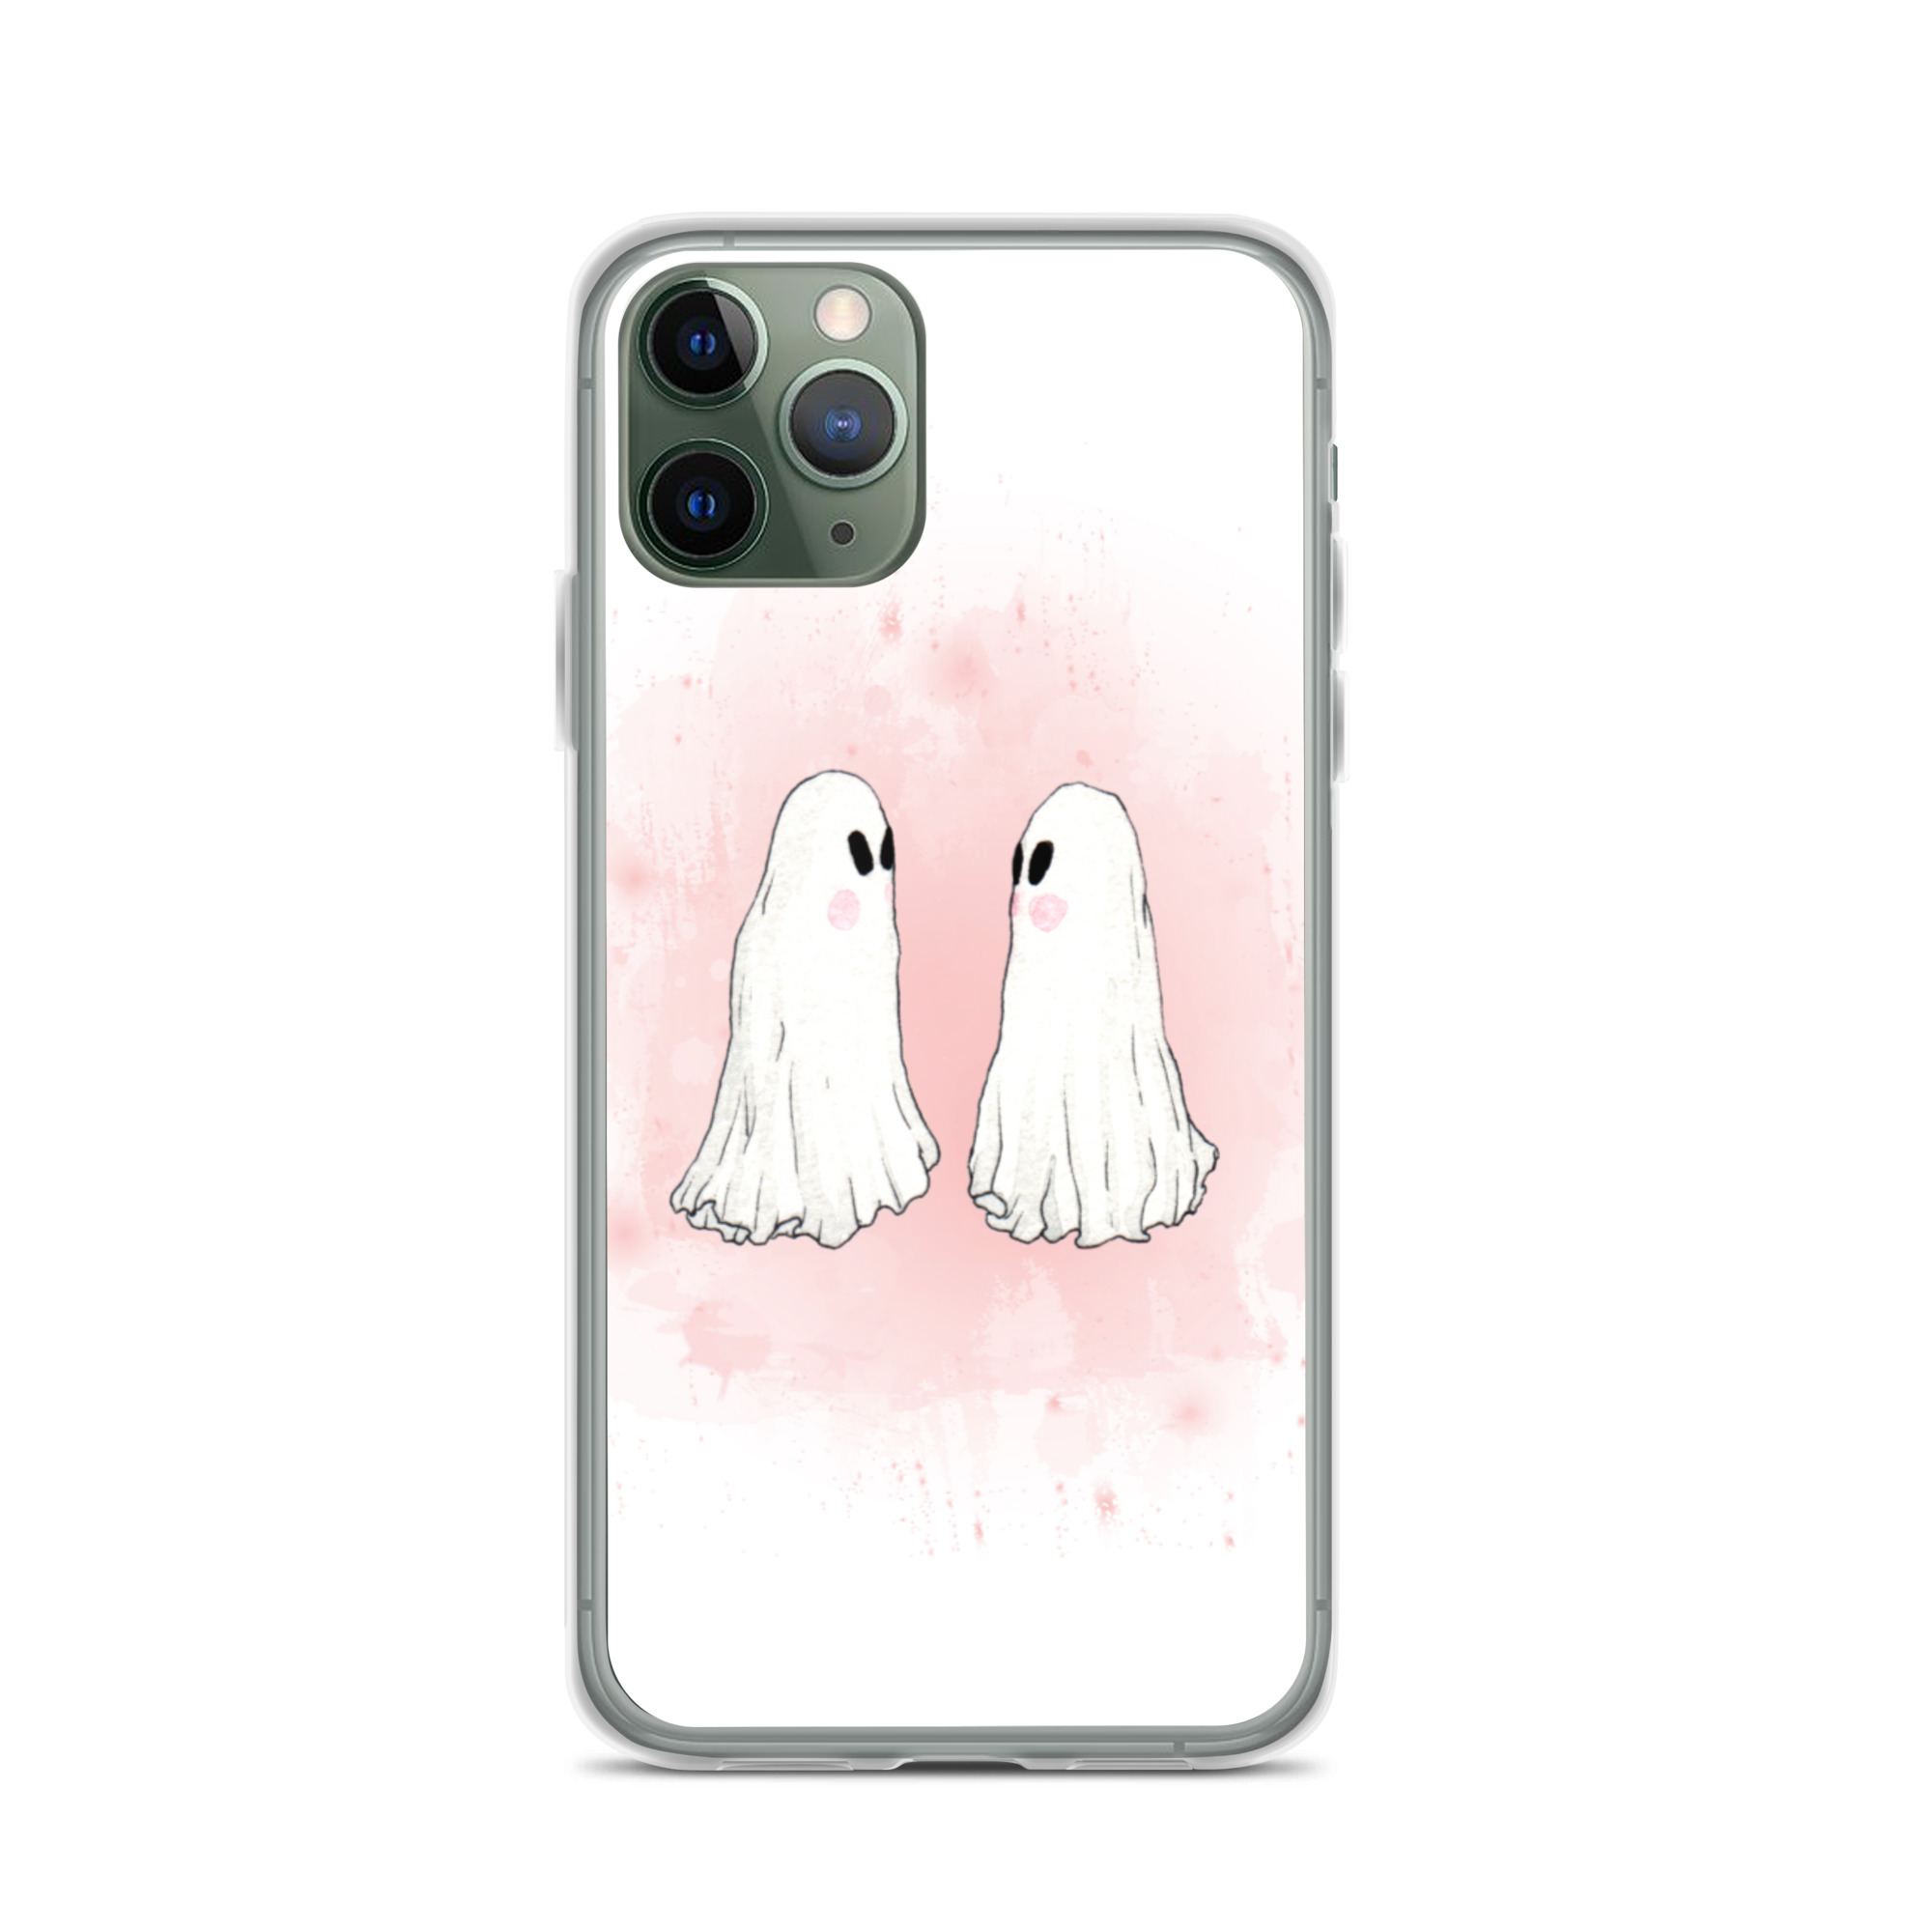 iphone-case-iphone-11-pro-case-on-phone-62eee0acd1a29.jpg